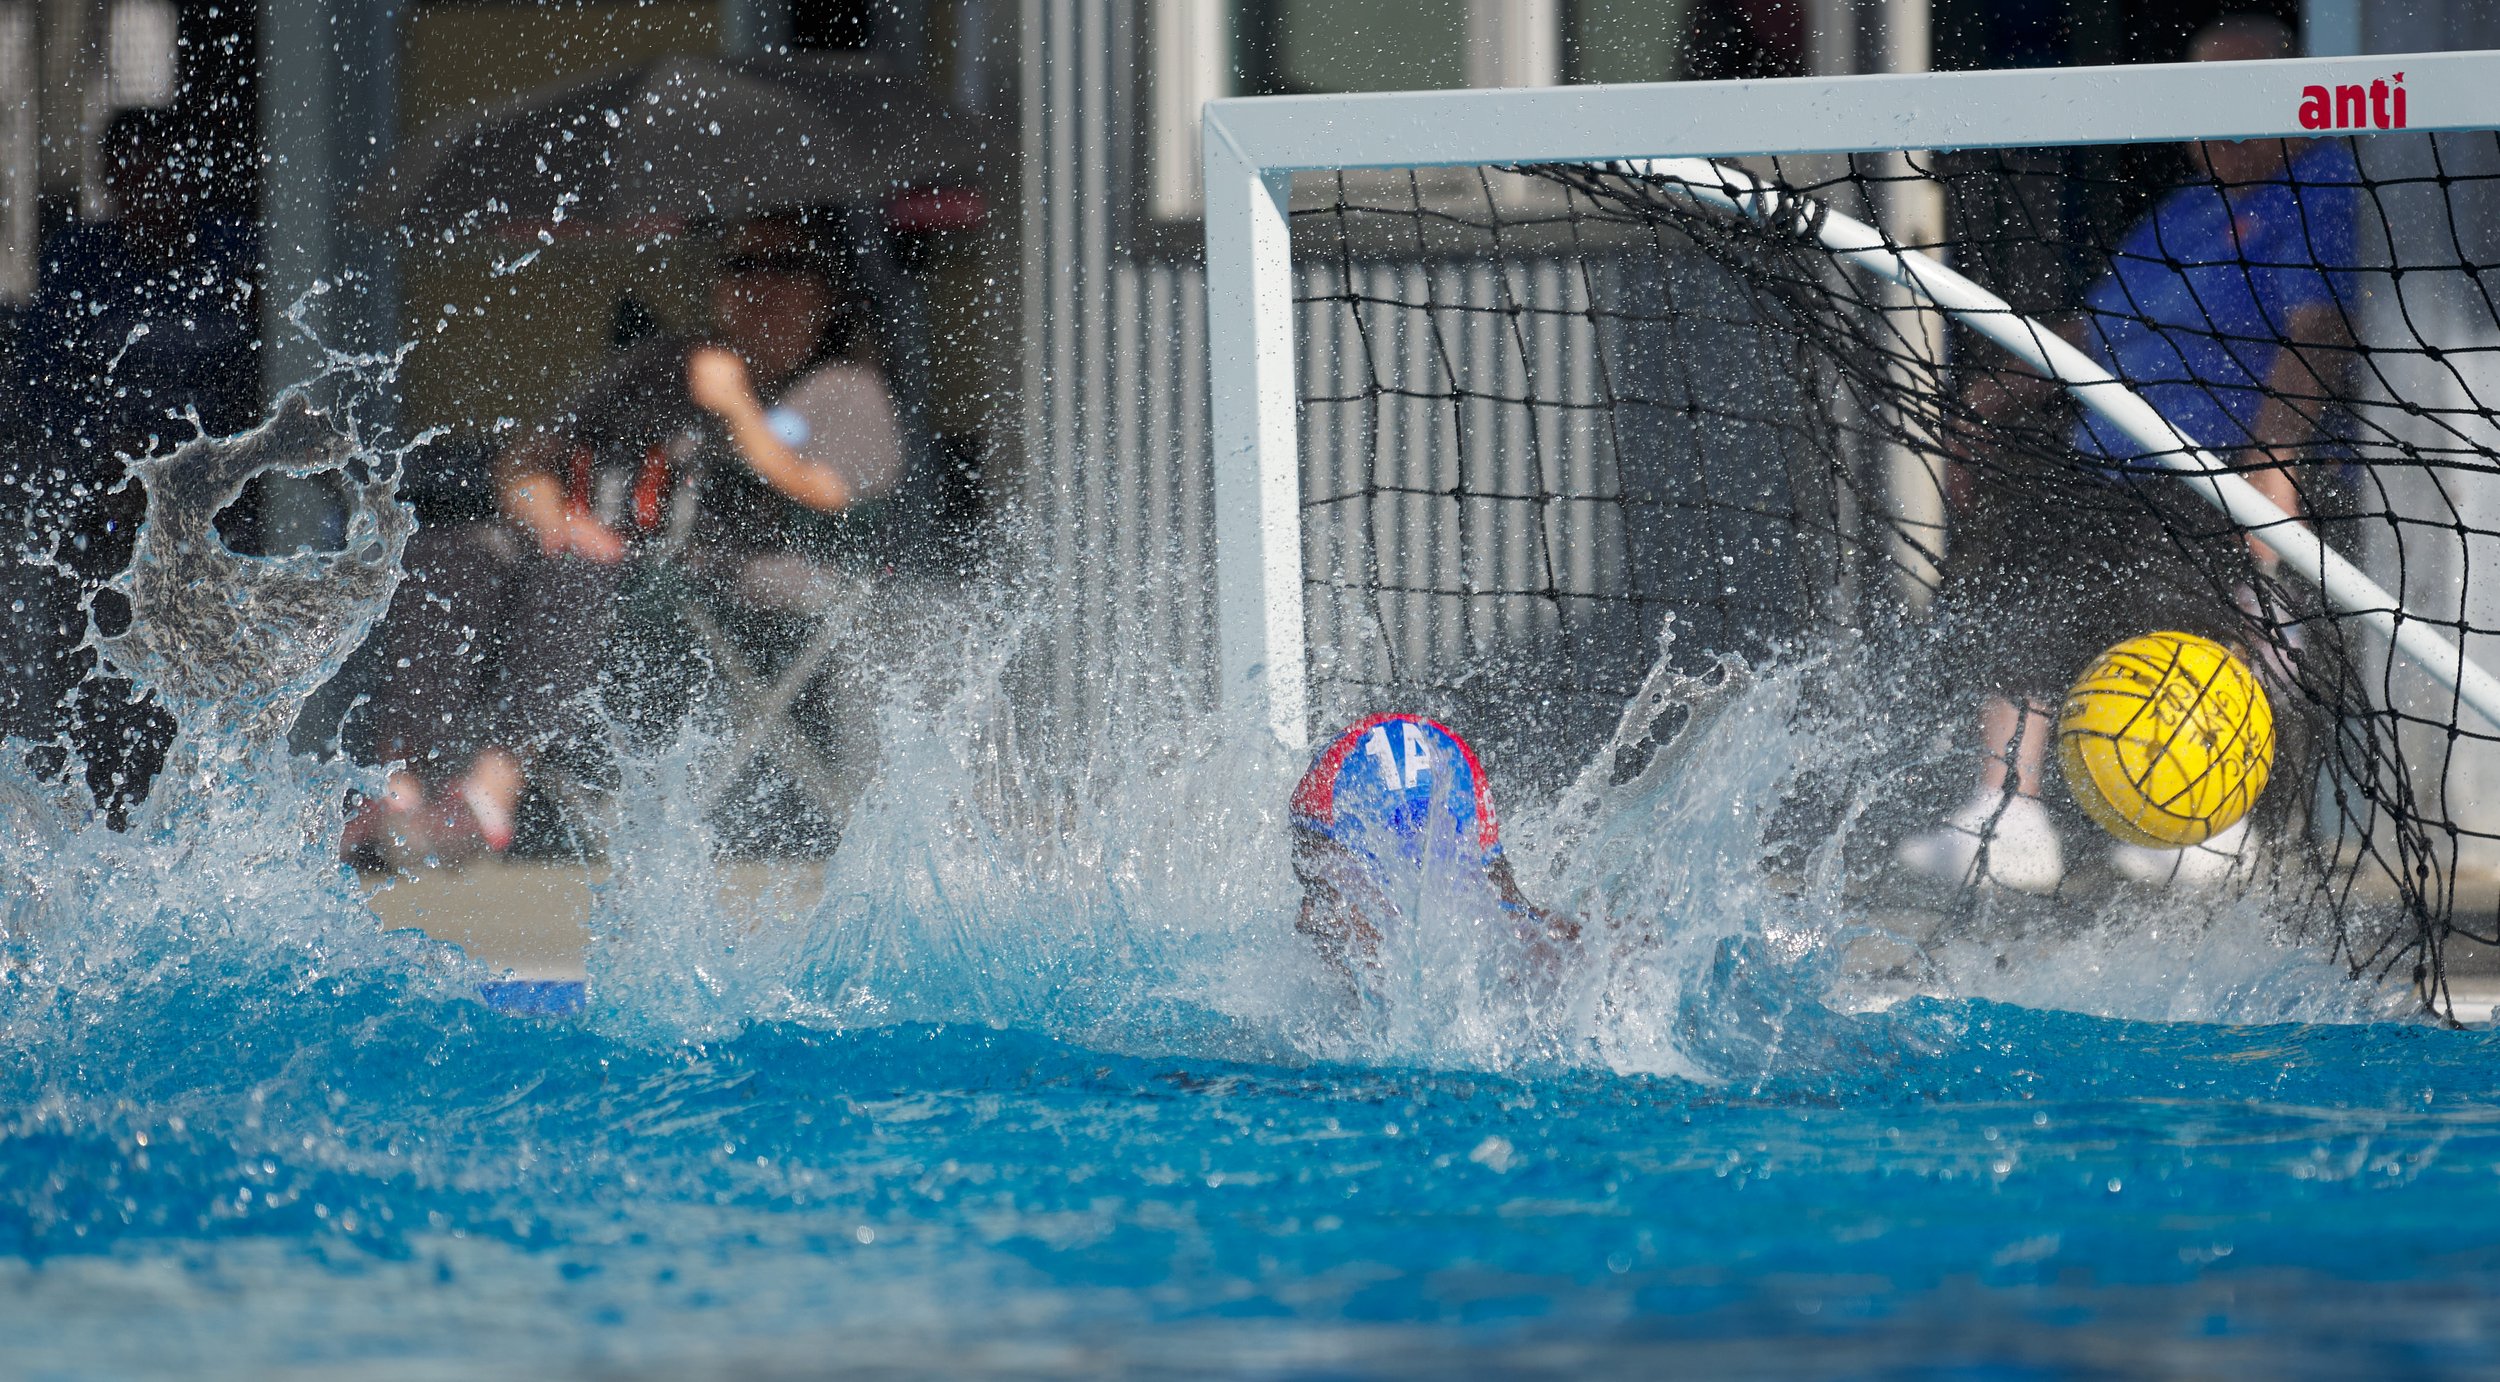  Santa Monica College Corsairs Men's Water Polo Goalie Nolan McBride fails to block the final goal of the match by the Los Angeles Valley College Monarchs on Wednesday, Sept. 28, 2022, at the SMC Aquatics Center in Santa Monica, Calif. The Corsairs l